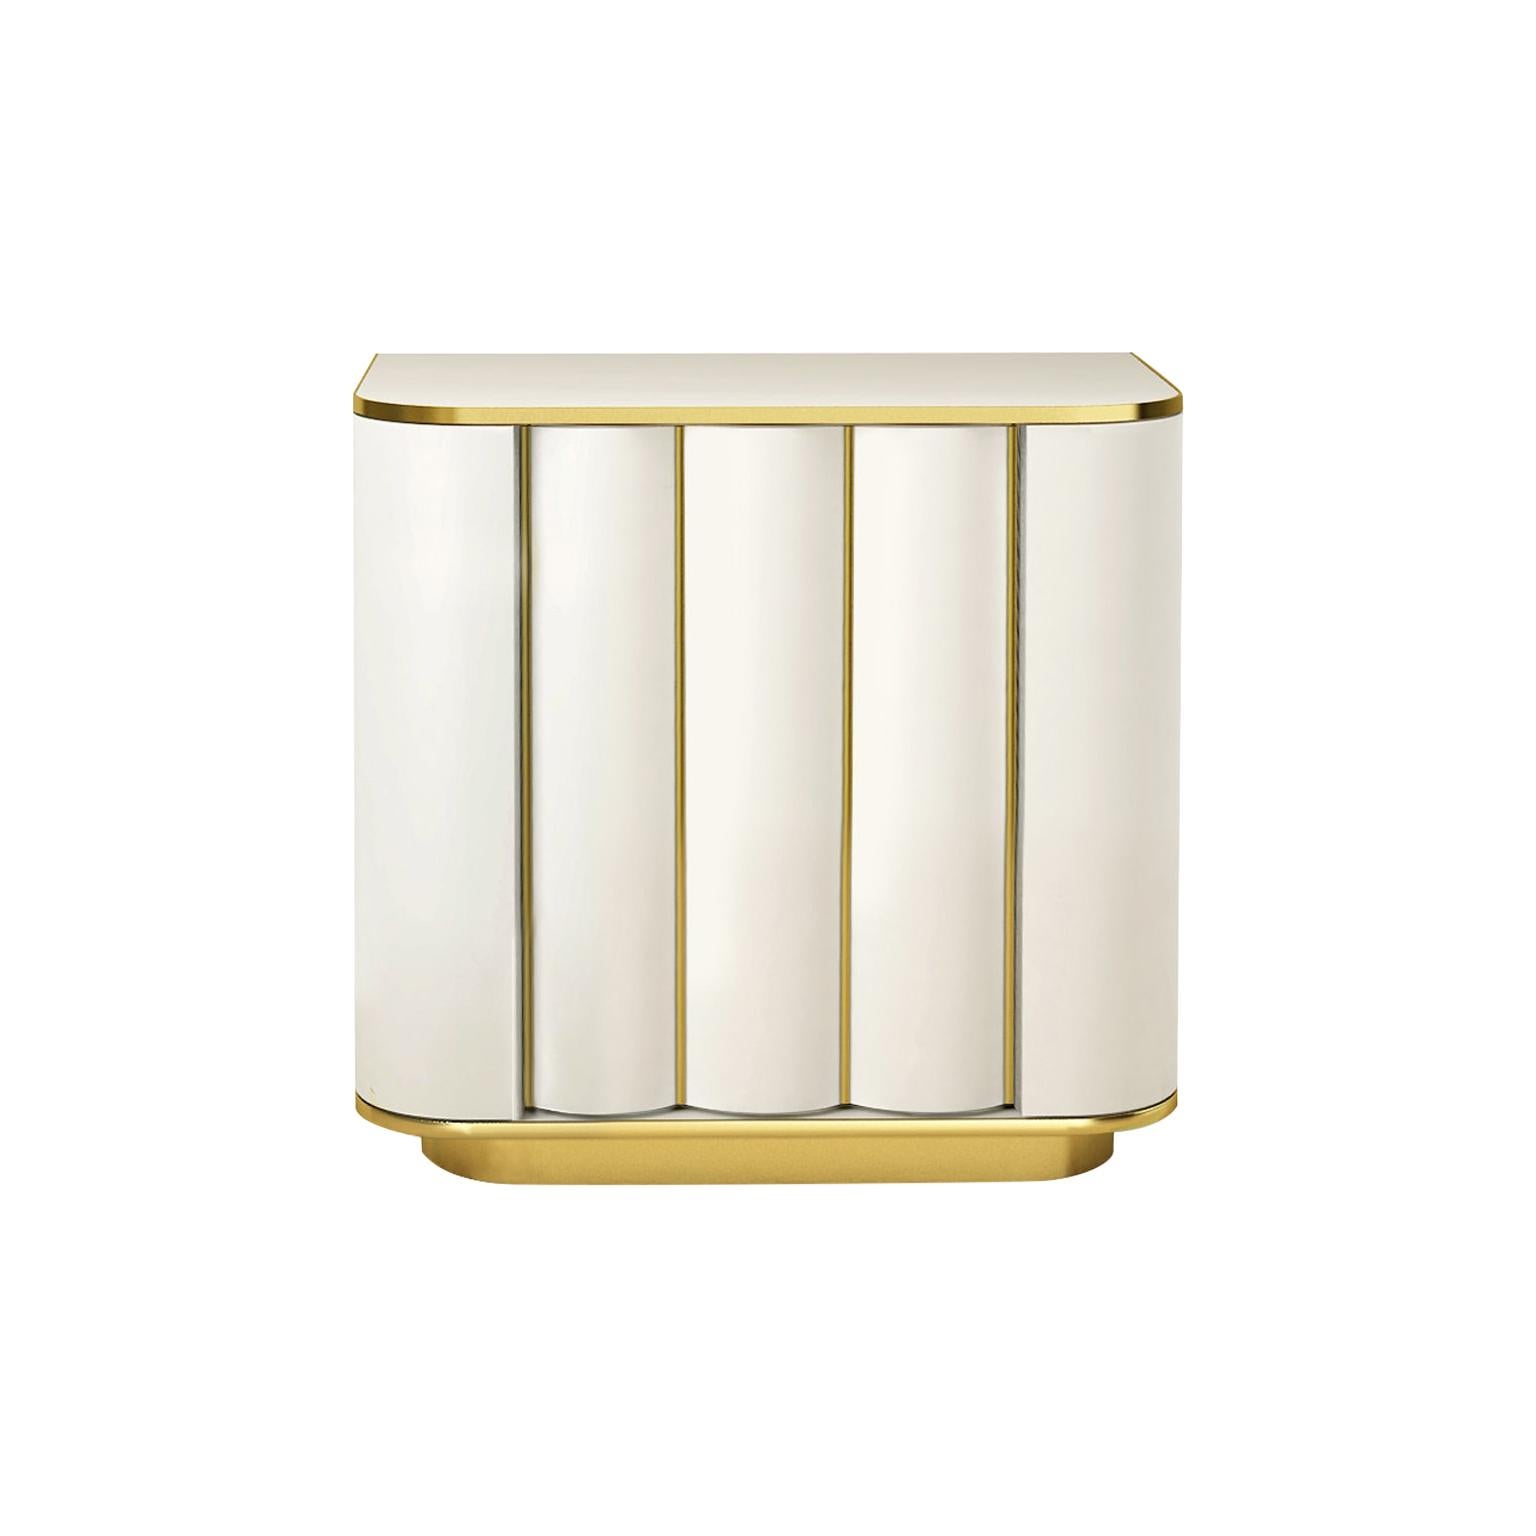 Isabella Costantini, Italy, Duilio Nightstand with Right or Left Opening